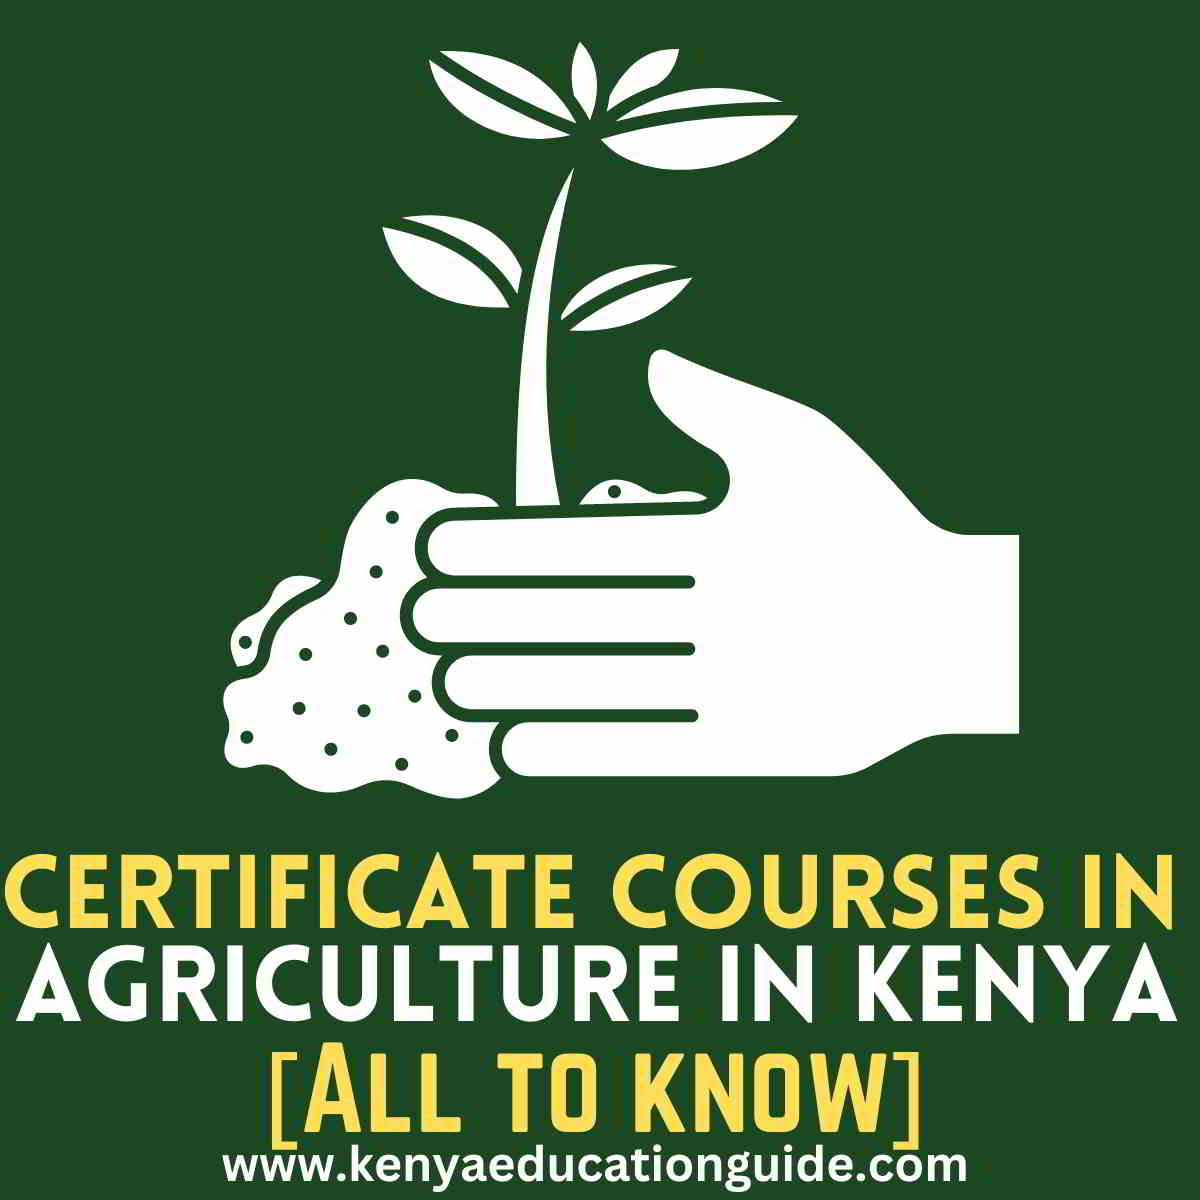 Certificate courses in agriculture in Kenya